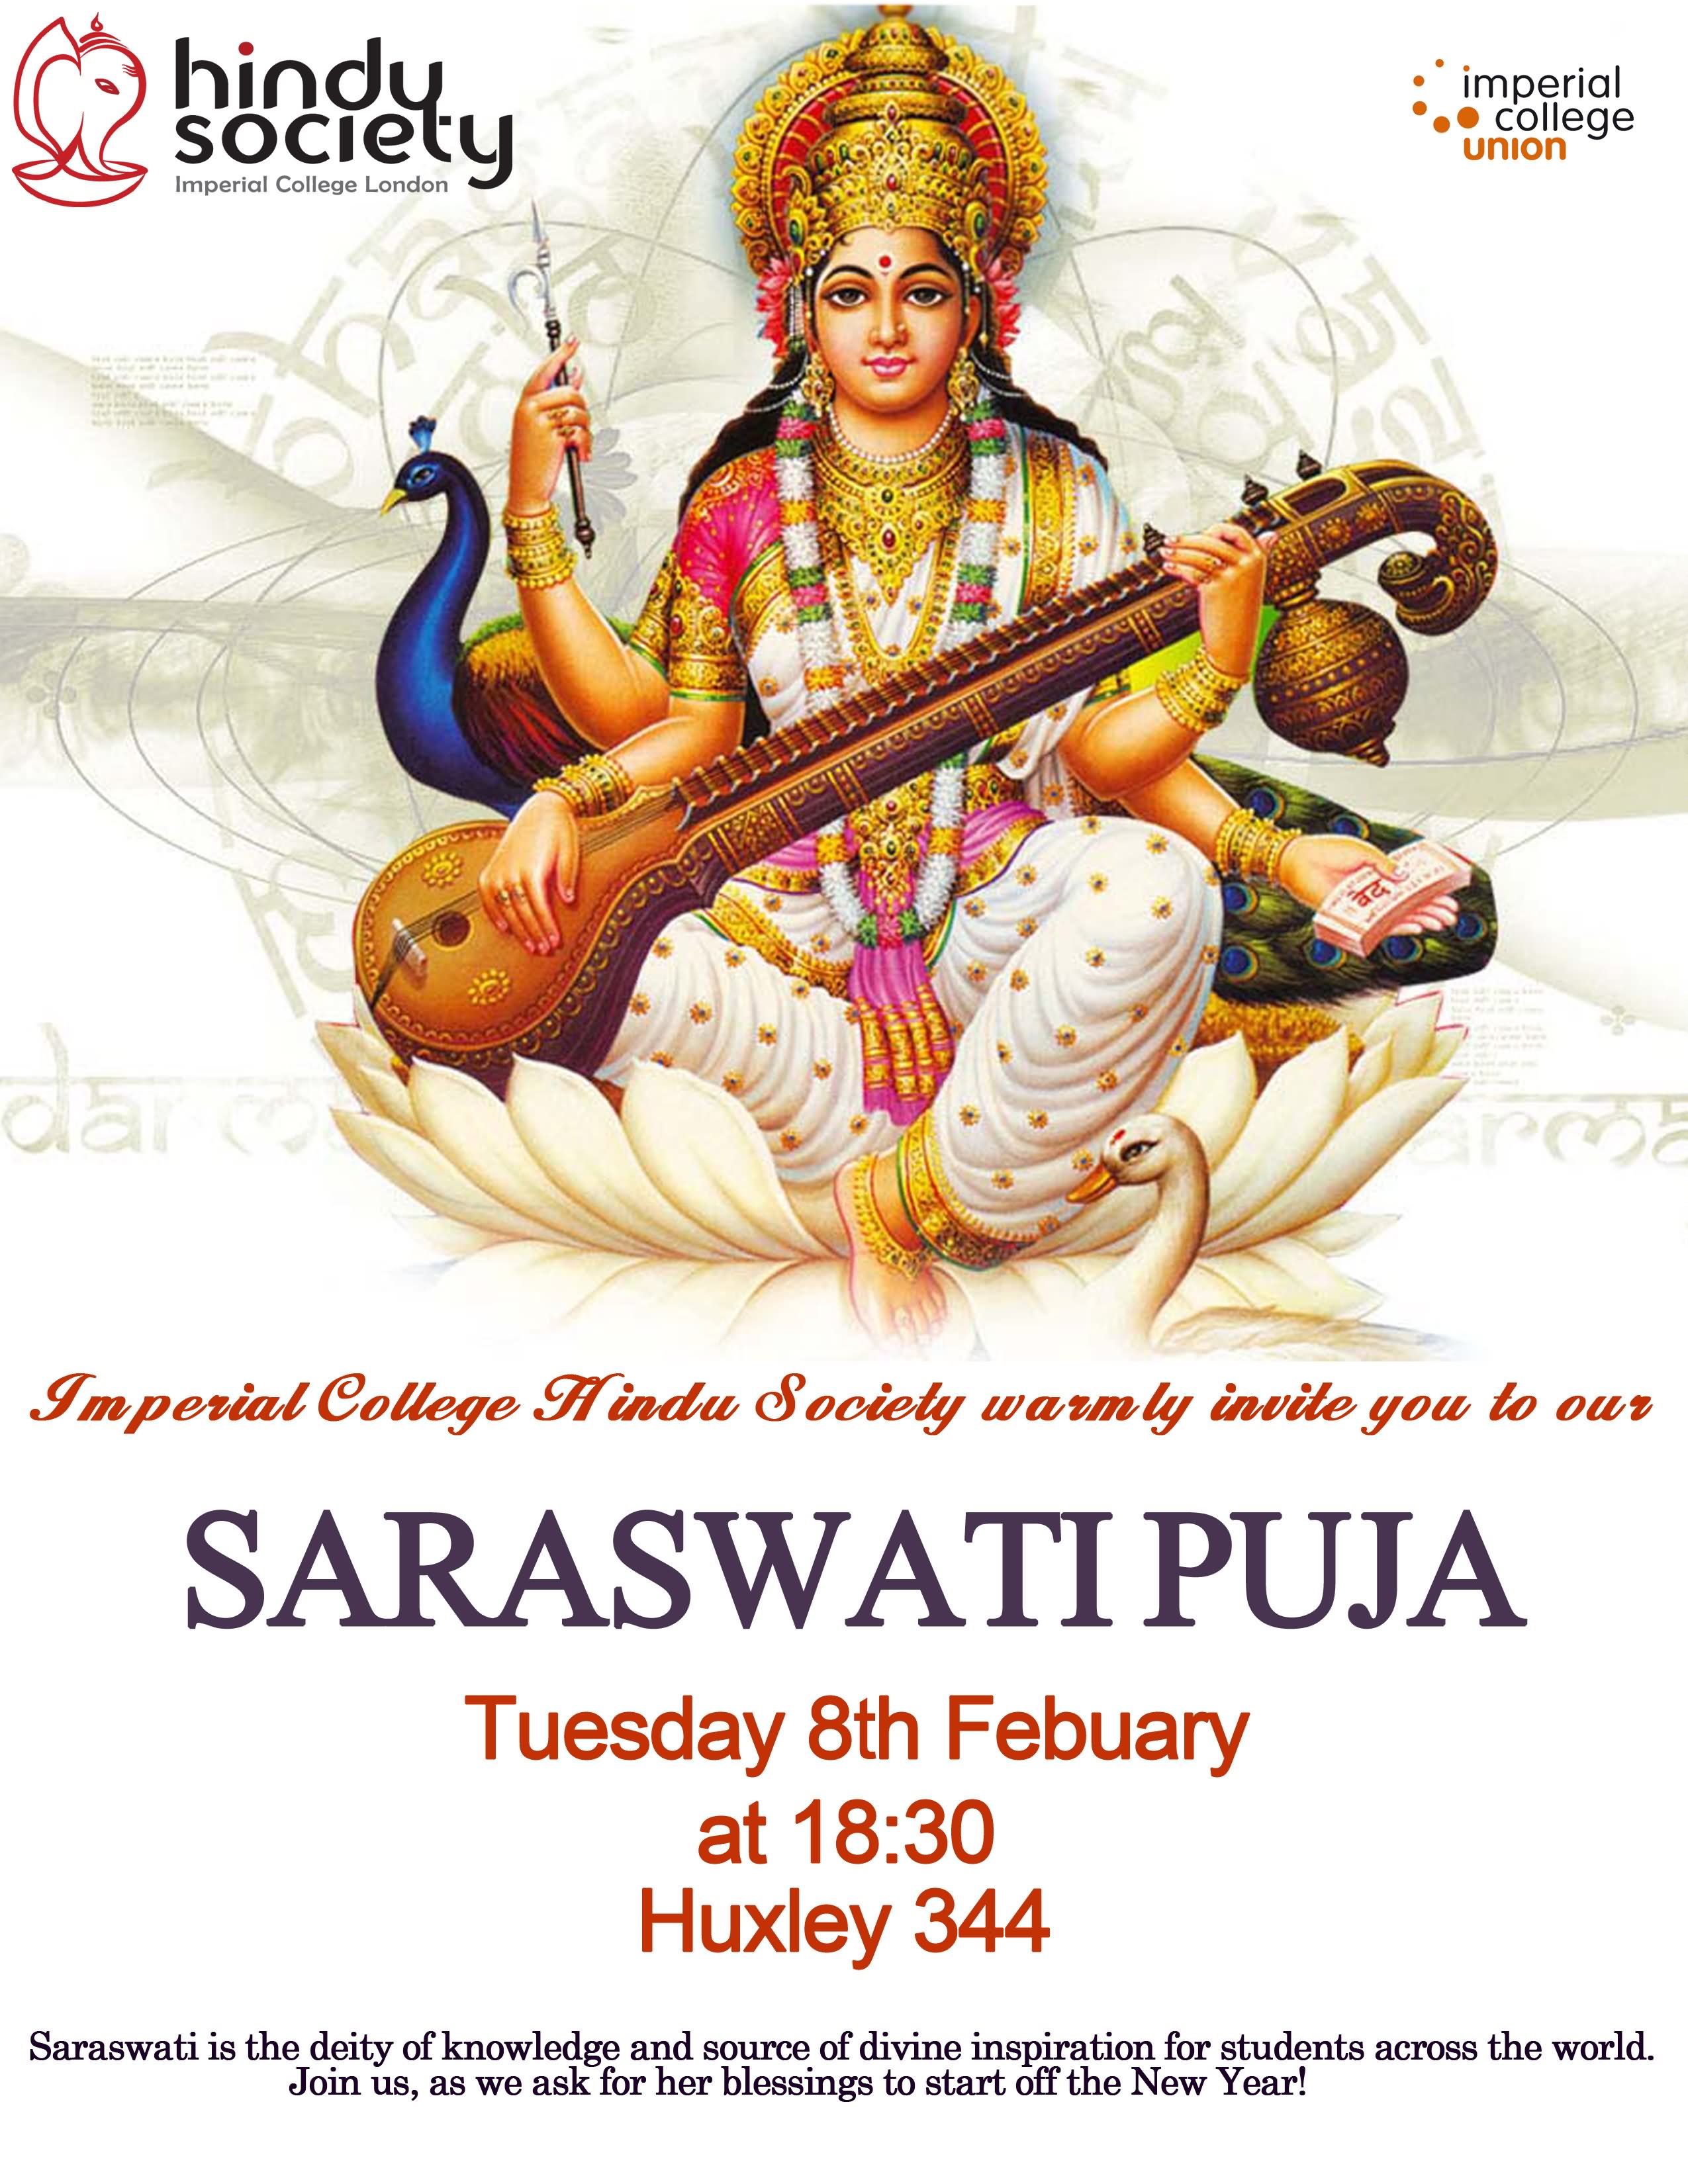 Imperial College Hindu Society Warmly Invite You To Our Saraswati Puja